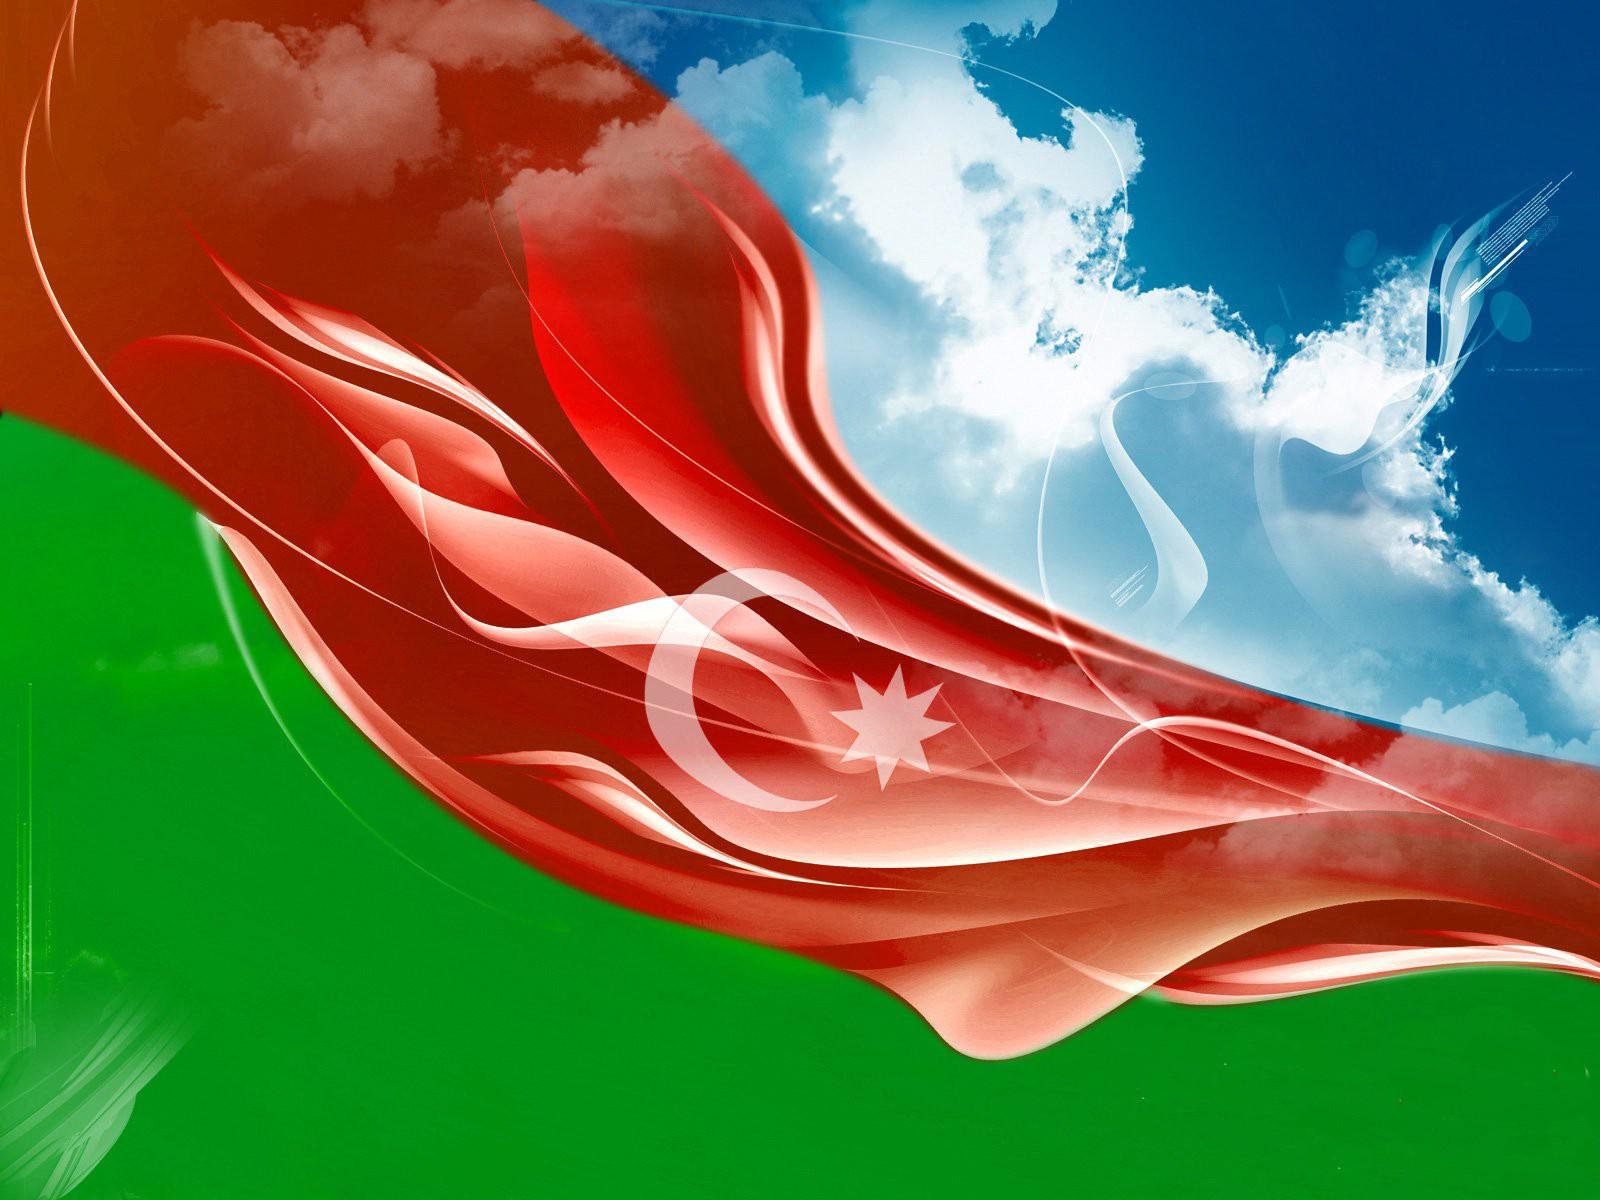 LATEST WALLPAPERS, 3D WALLPAPERS, AMAZING WALLPAPERS: Azerbaijan